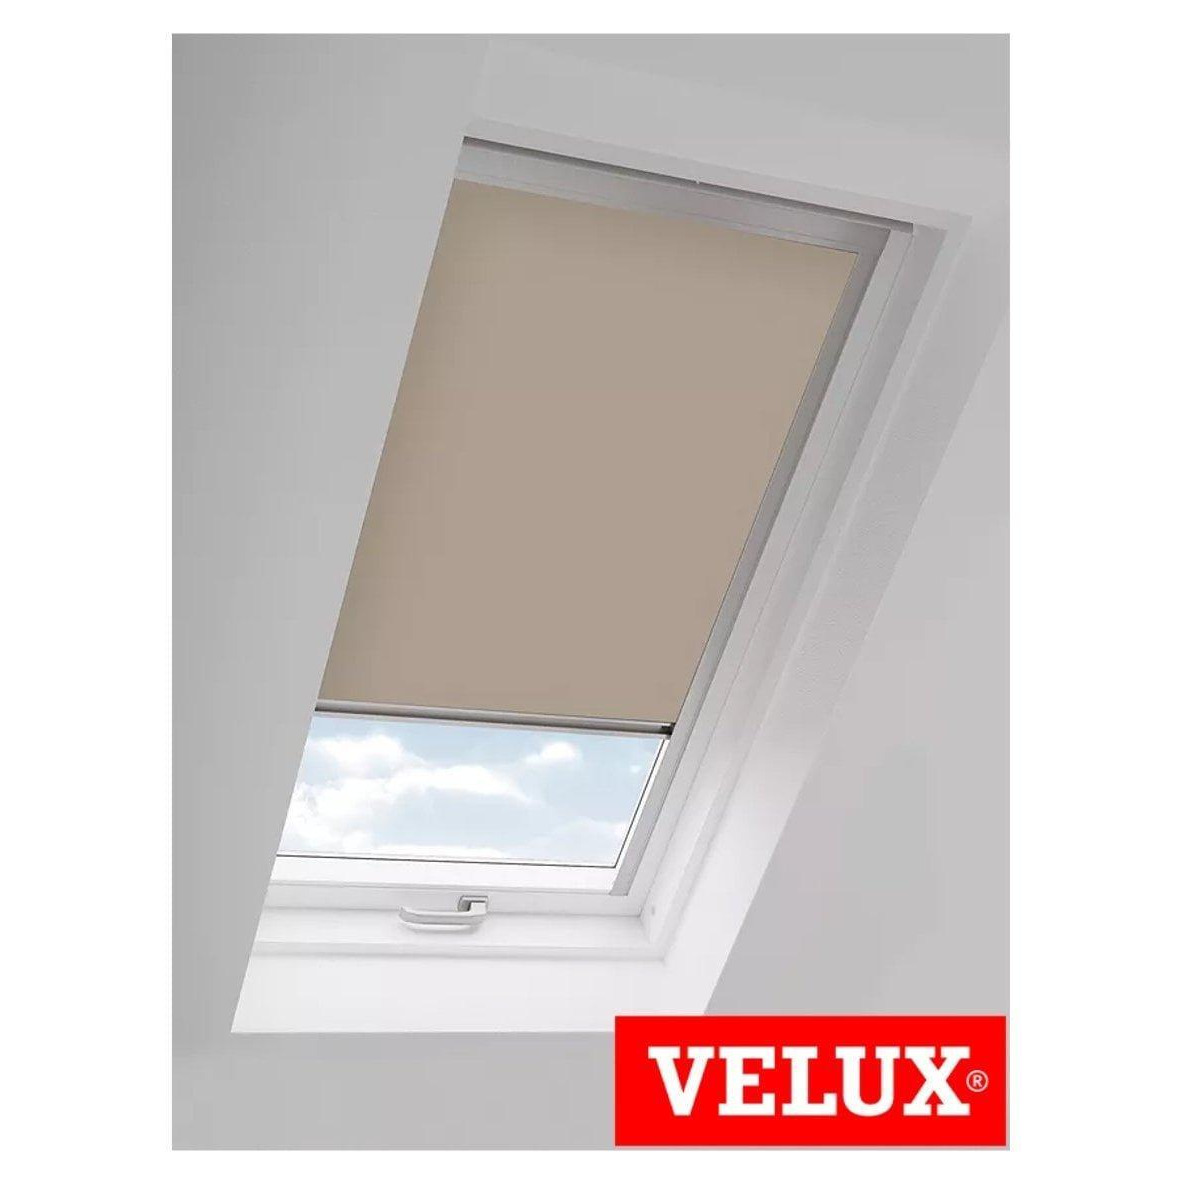 Karo Thermal out Skylight Roller Blinds (Velux Roof Windows G Codes) - image 1